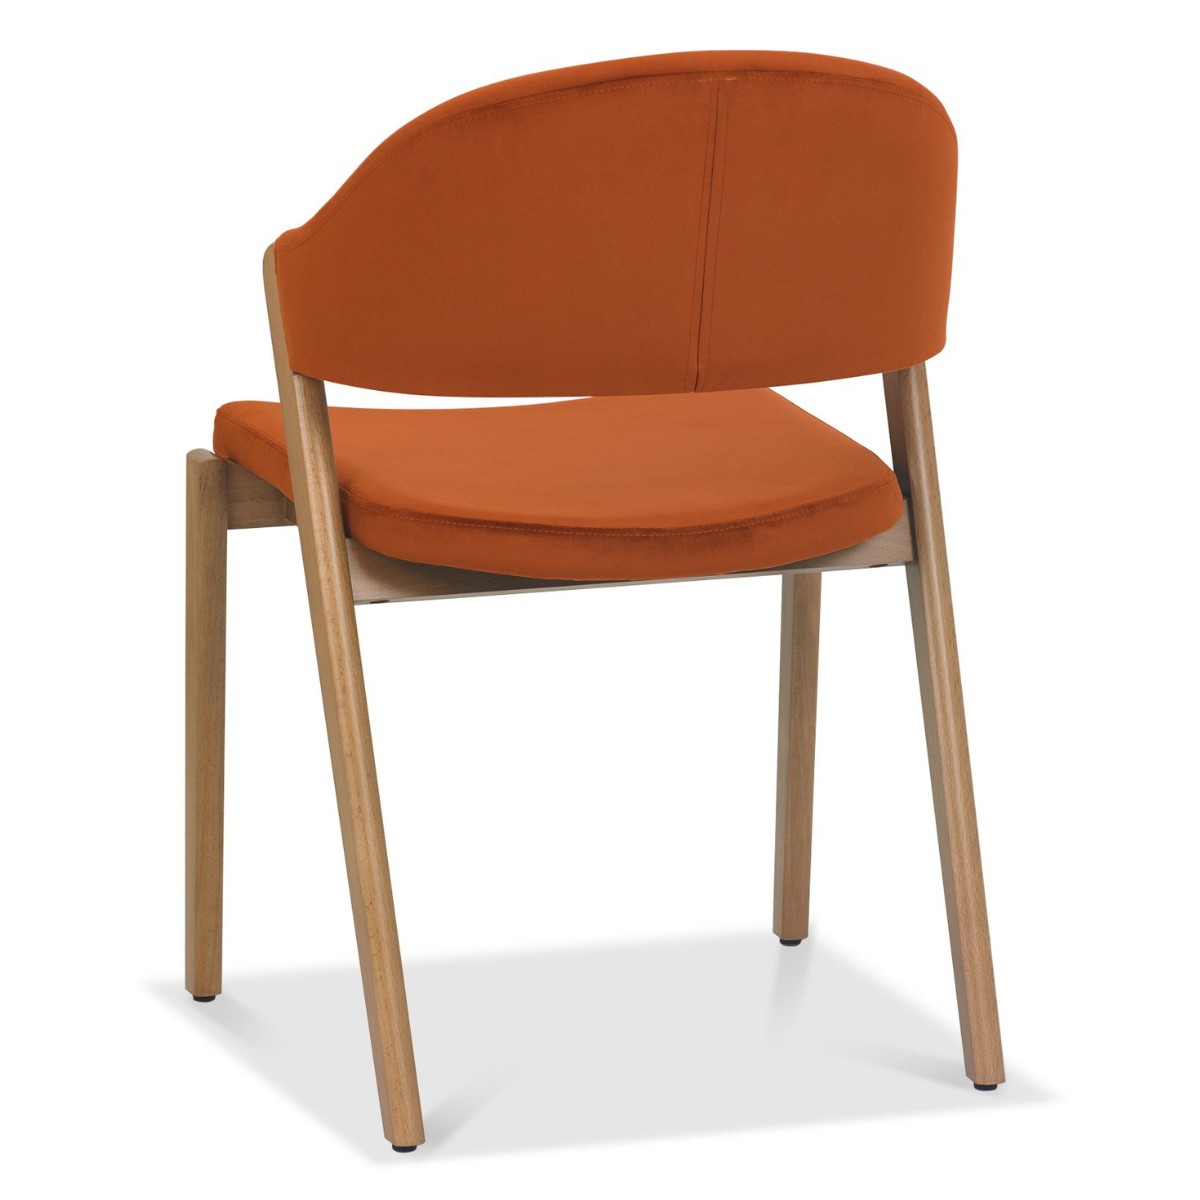 Chambery Rustic Oak Upholstered Dining Chair Orange - 3